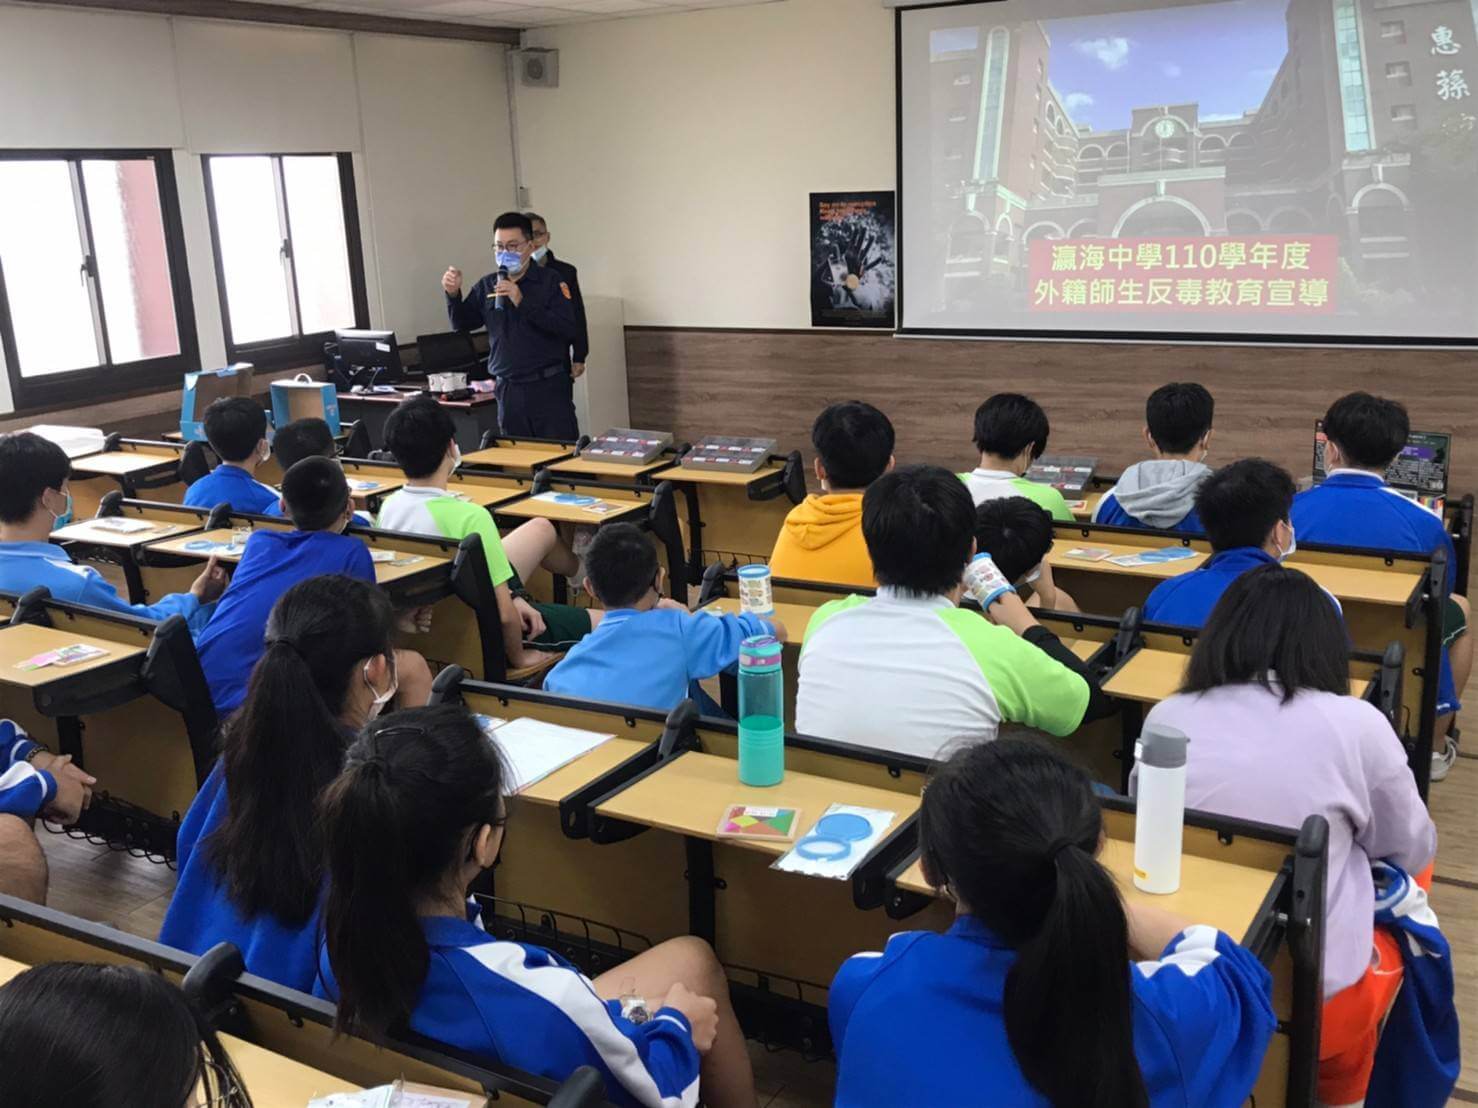 The Tainan Police Department holds "Bilingual Talk" to advocate anti-drug abuse. (Photo / Provided by Tainan City Police Station)